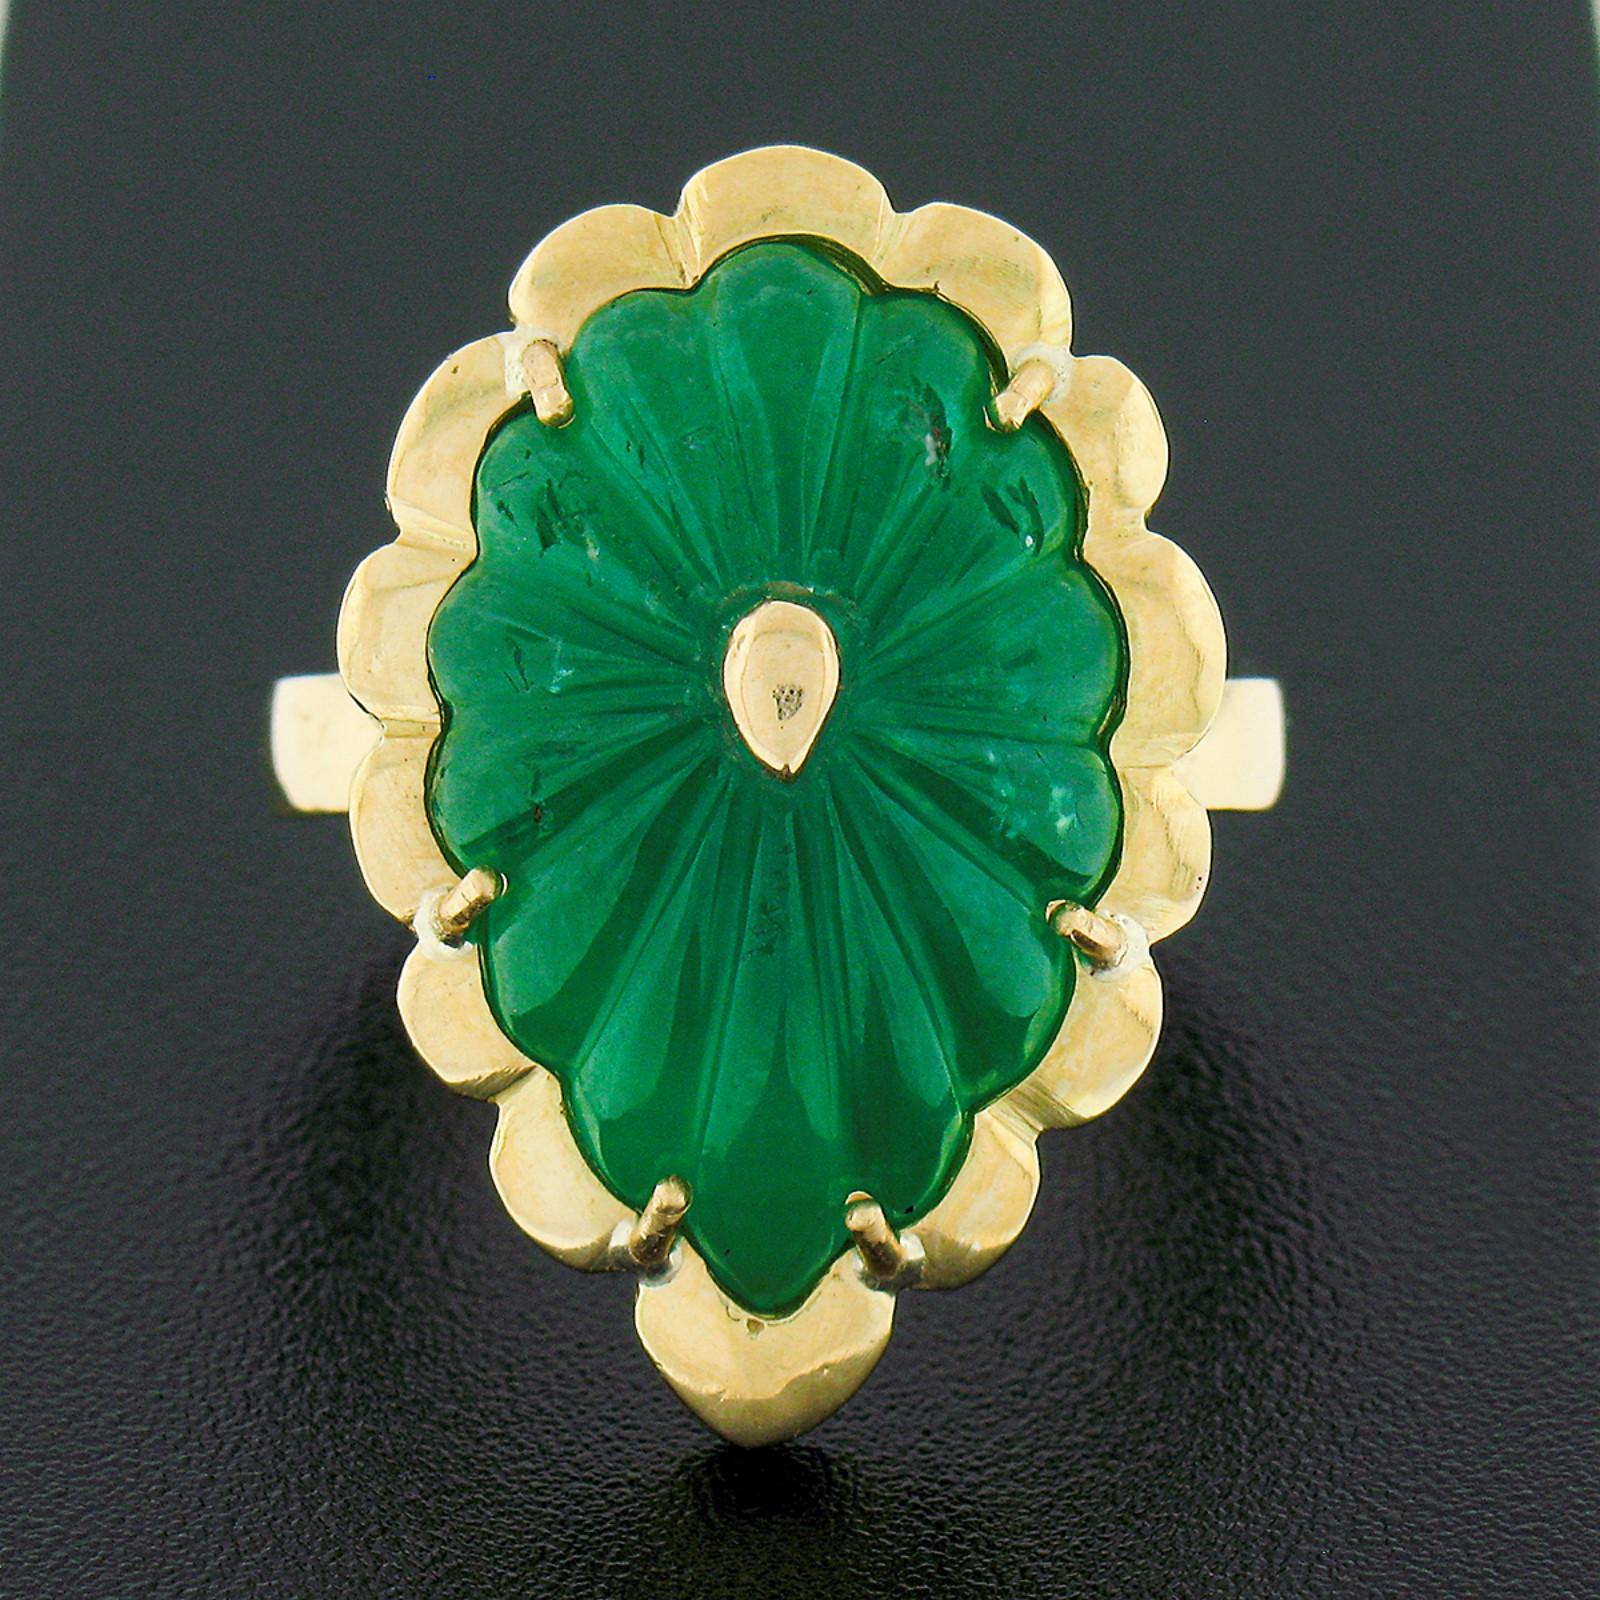 This uniquely custom handmade emerald cocktail ring is very well crafted in solid 18k green gold and features a gorgeous, GIA certified natural emerald stone that's neatly set at the center of a scalloped setting that beautifully traces the carving